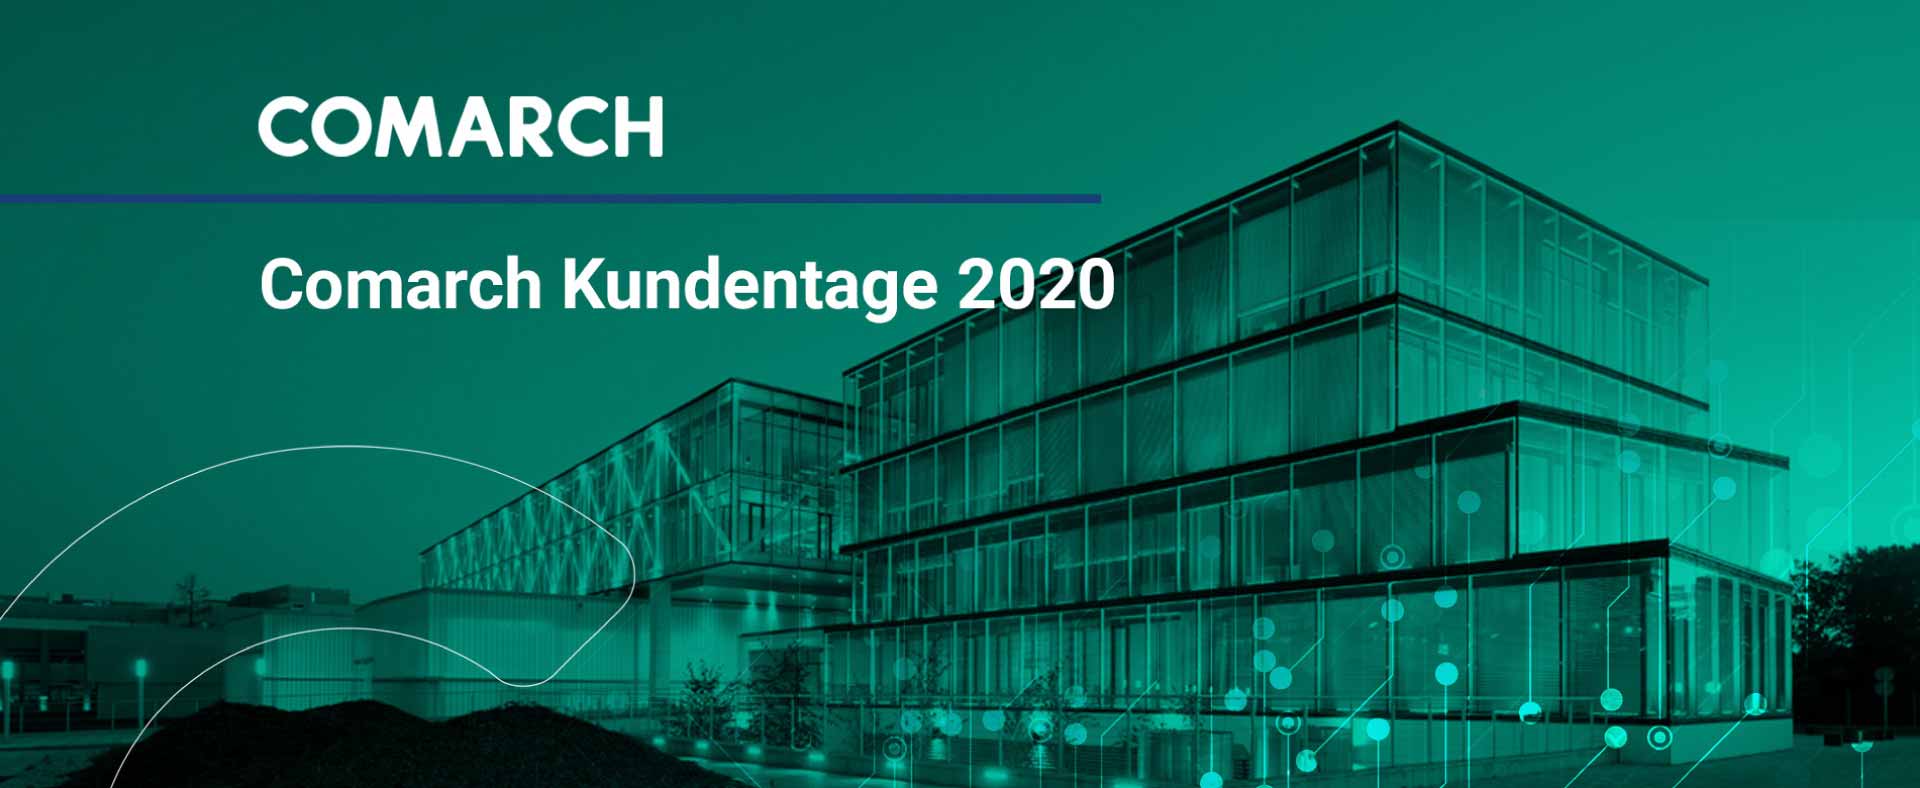 Comarch Kundentage